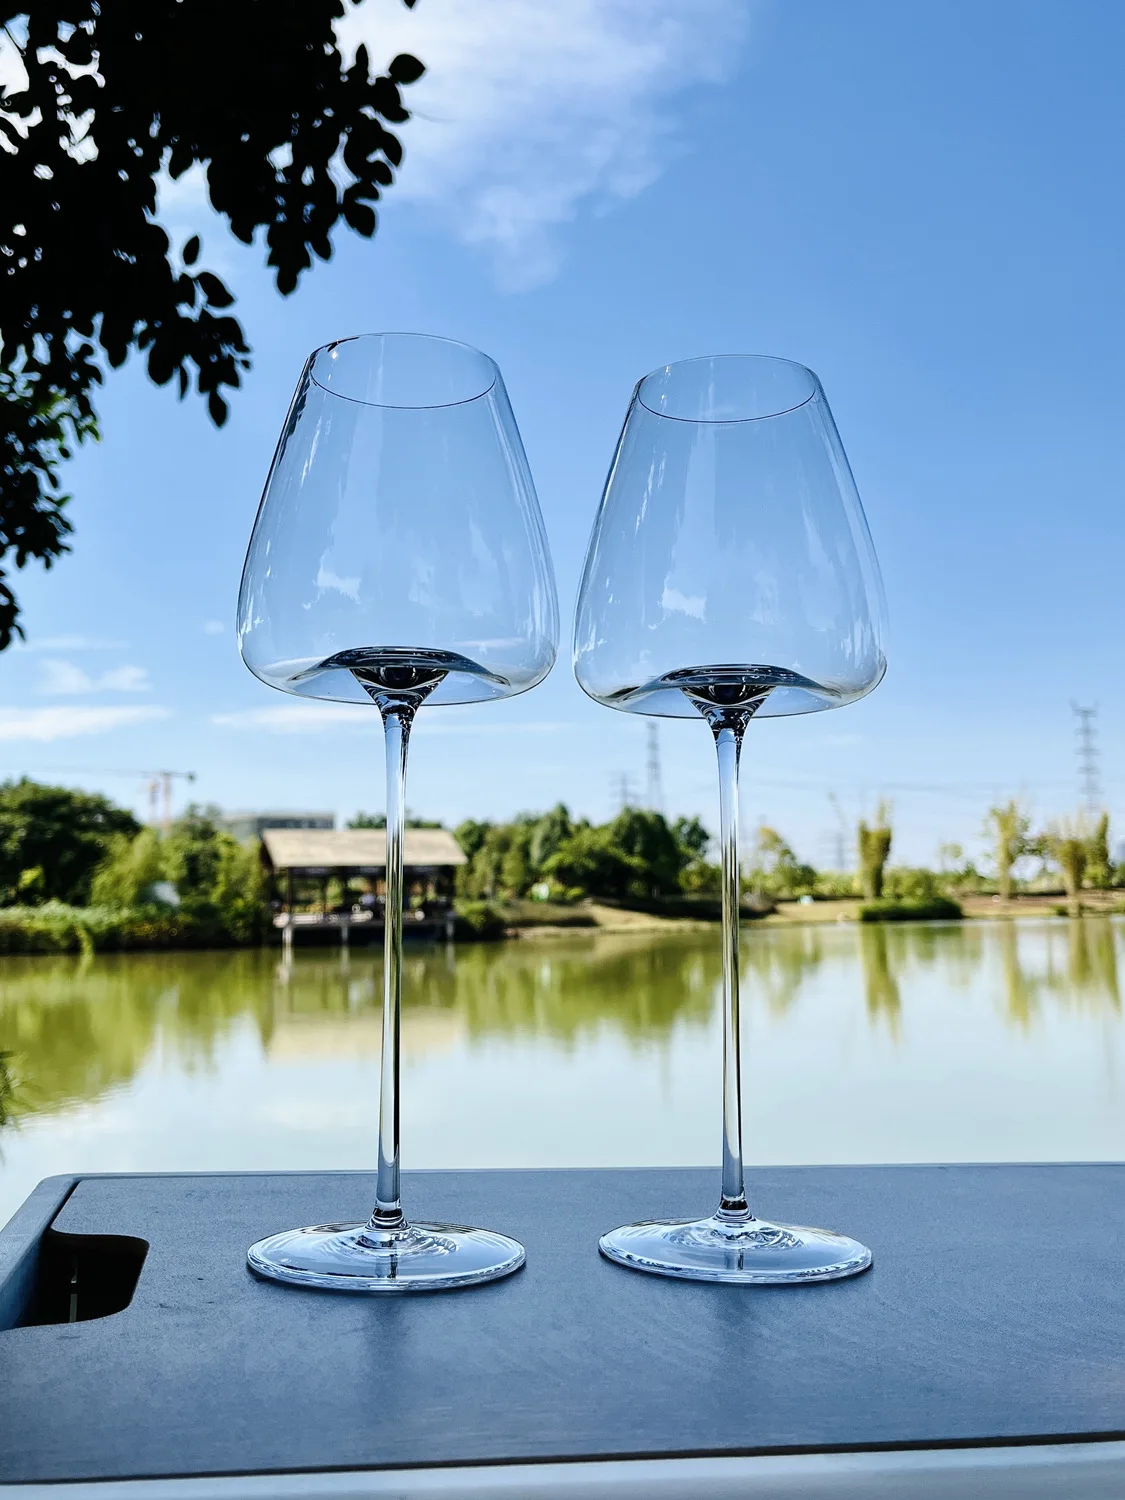 650ml/800ml Very Thin Red Wine Glass Cup High-end Bordeaux Burgundy  Champagne Glass White Wine Glass Cup Camping Wine Glass